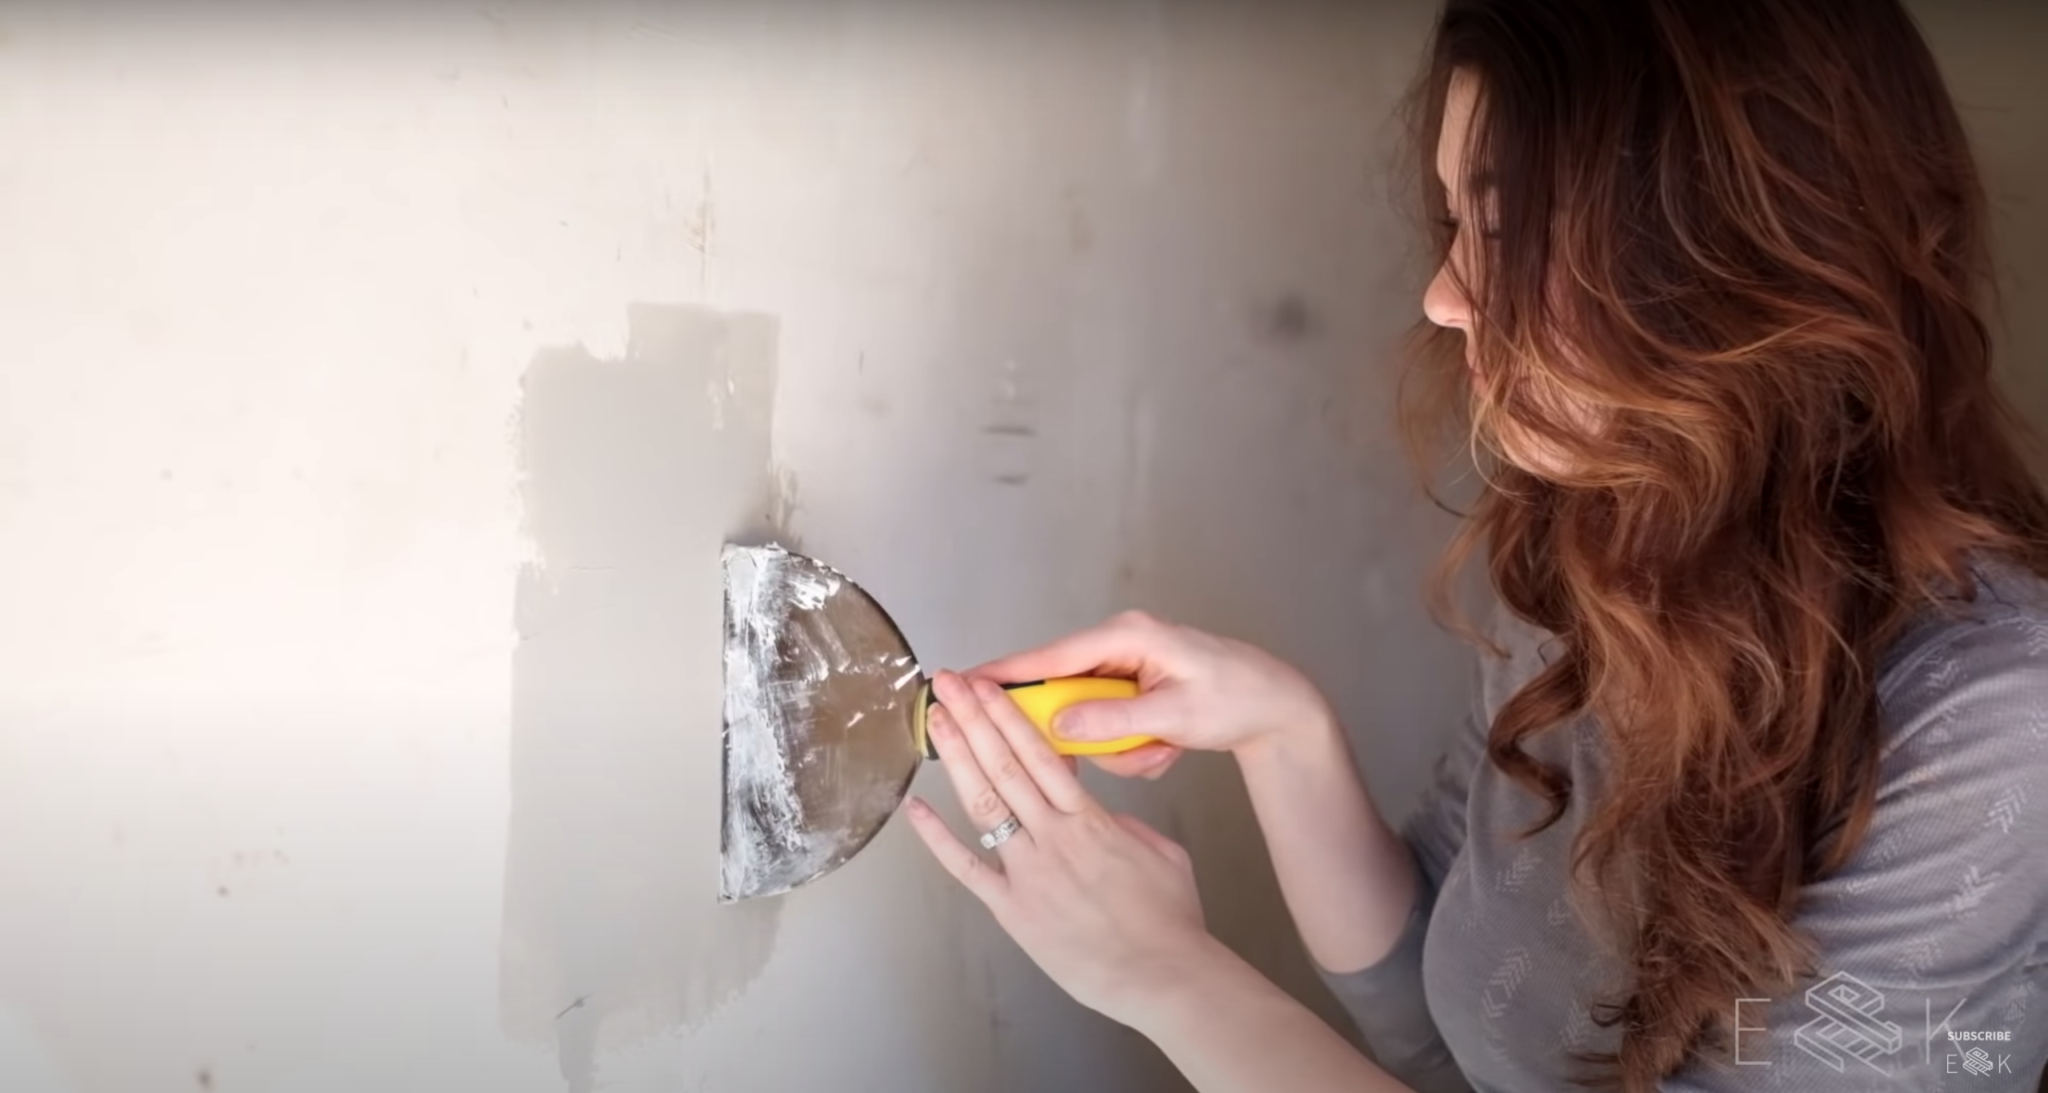 3 Easy Ways to Patch Drywall